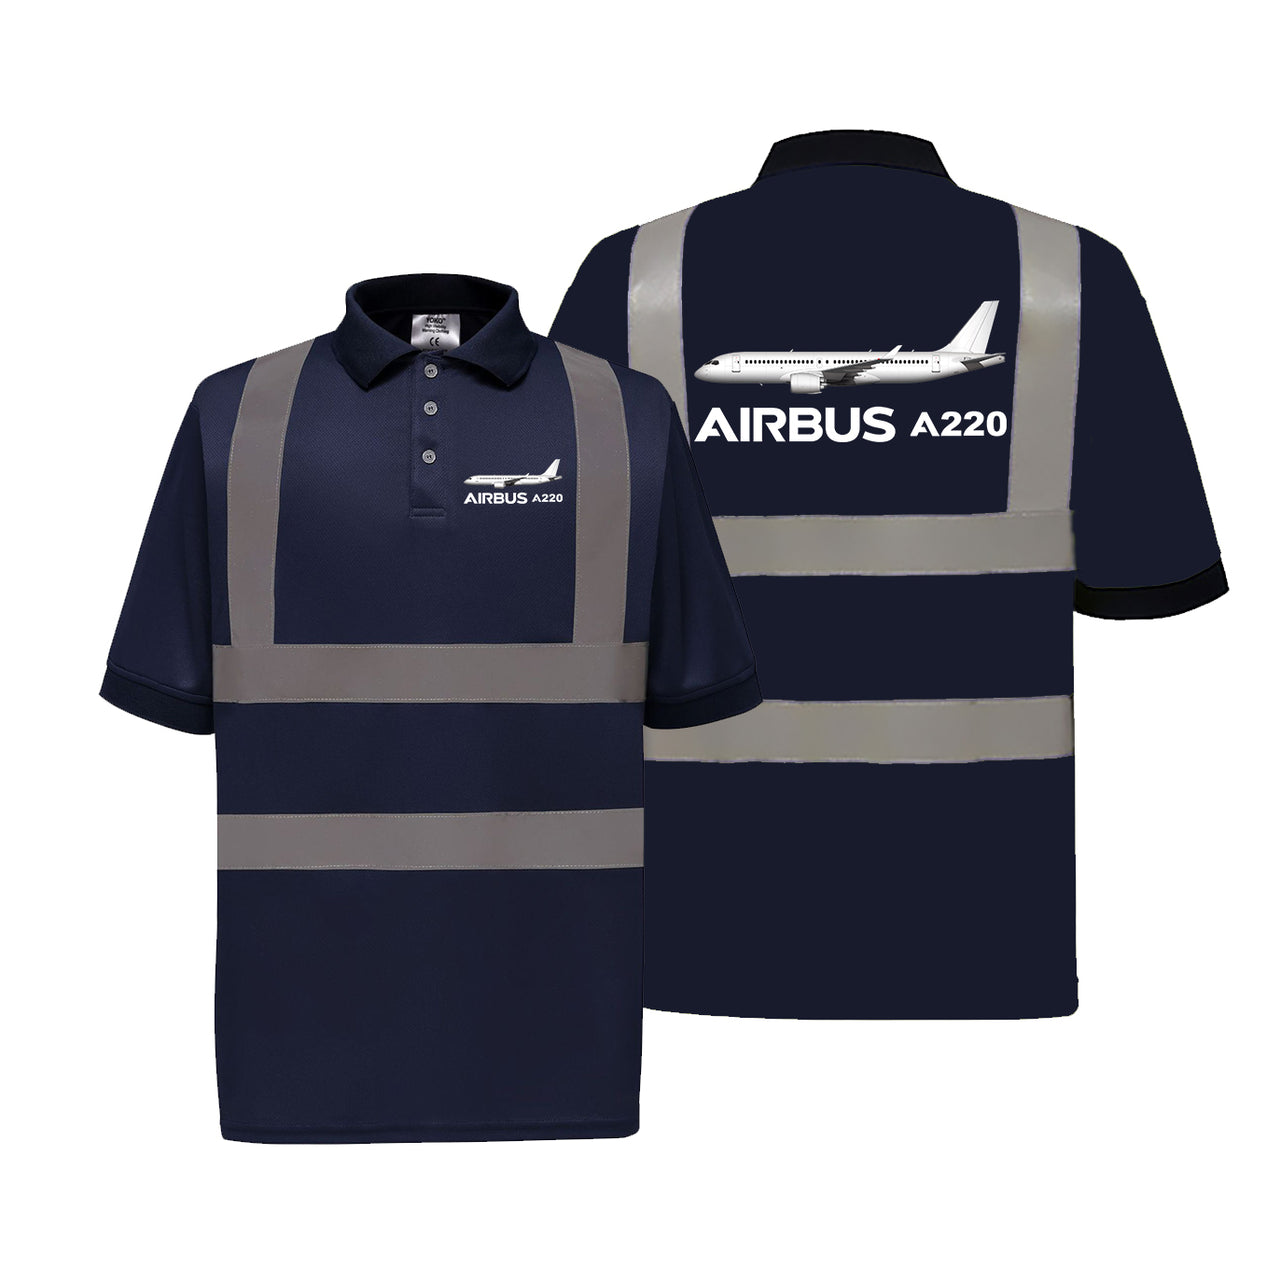 The Airbus A220 Designed Reflective Polo T-Shirts